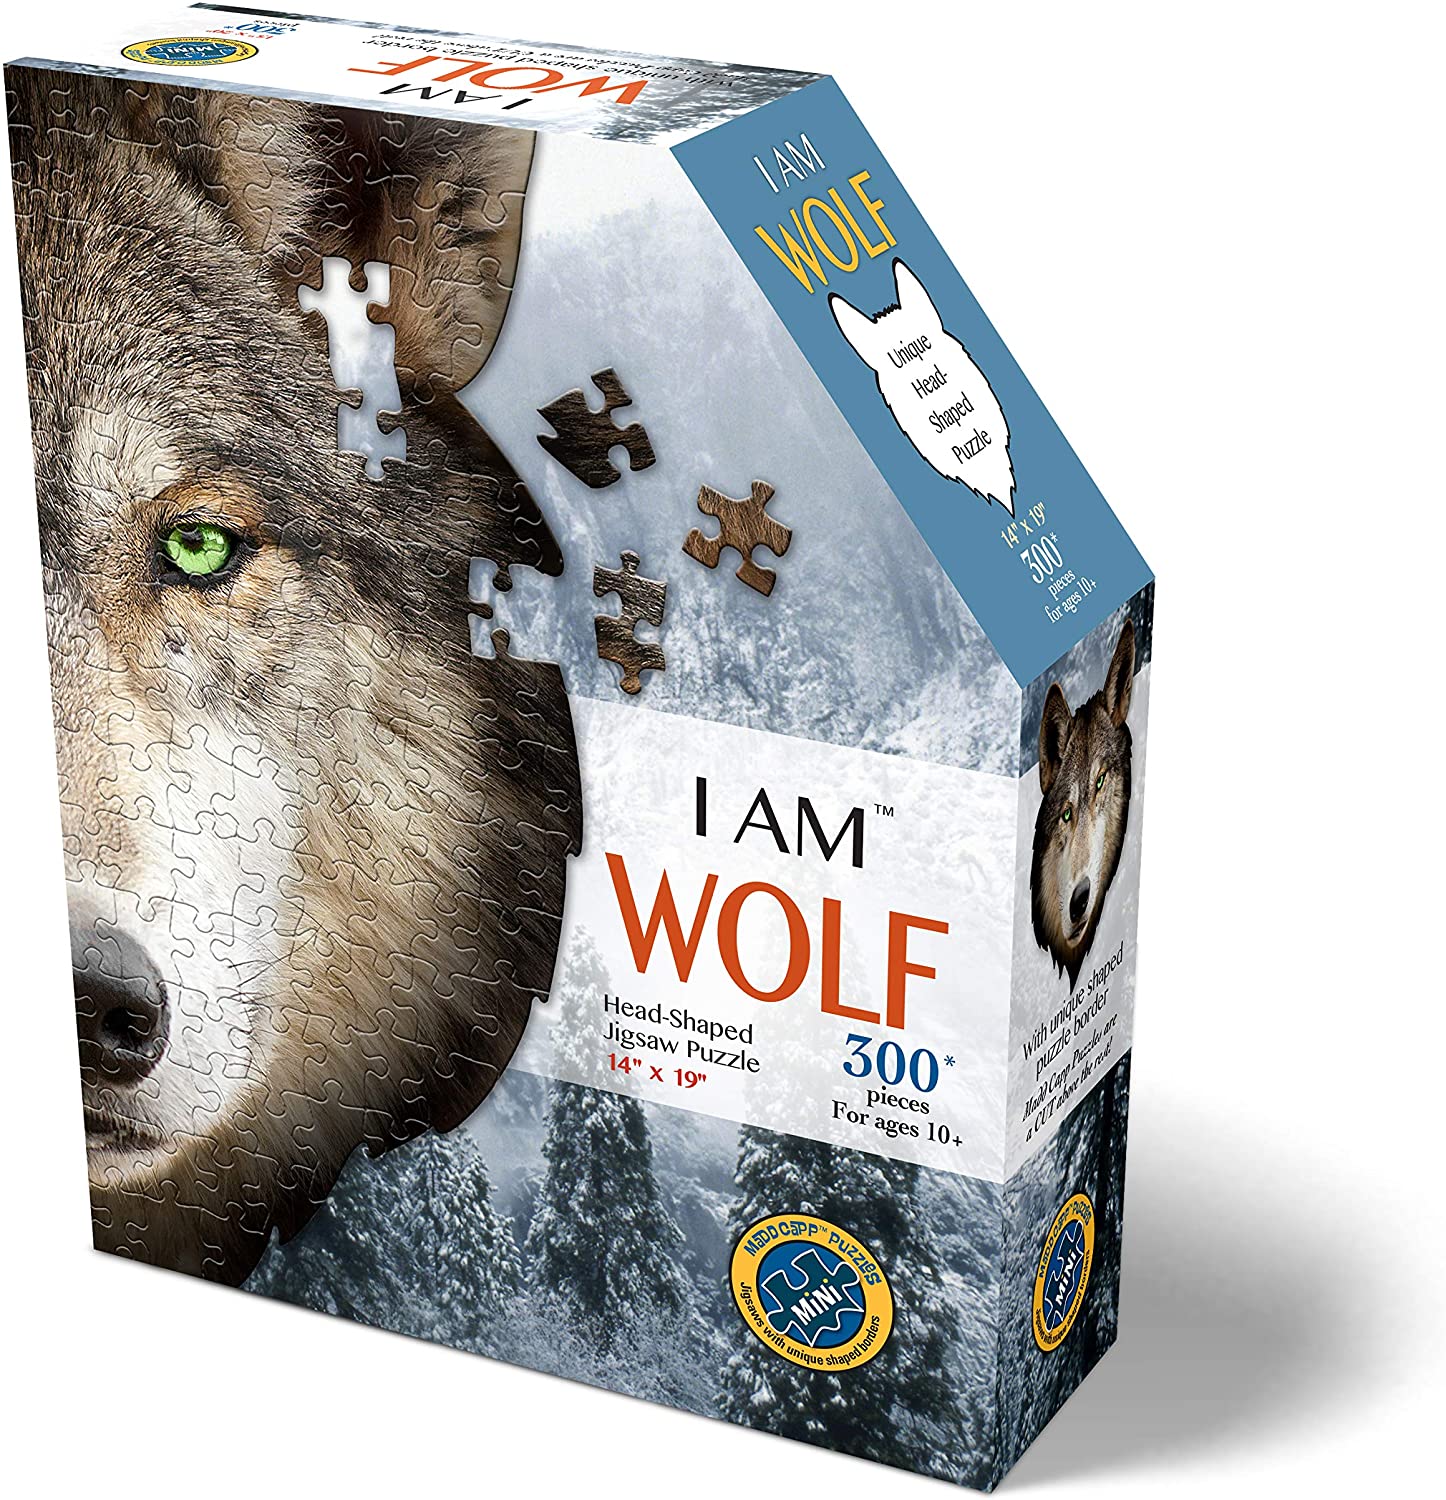 I AM WOLF Puzzle